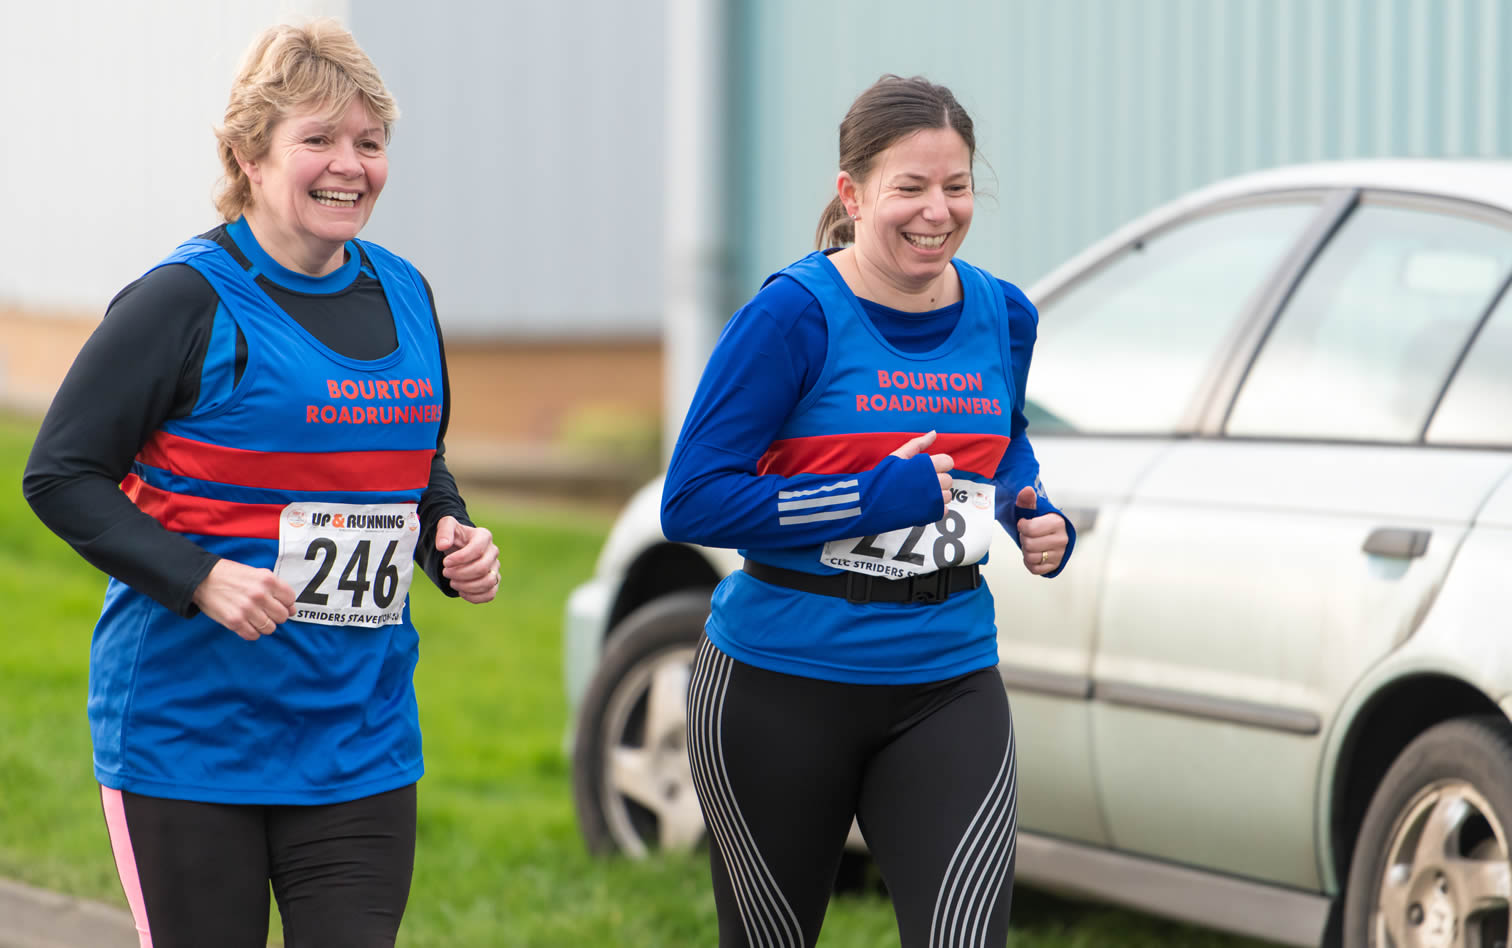 Bourton Roadrunners' Mary Worker and Janice Townsend at Staverton 10m - 26-01-2020